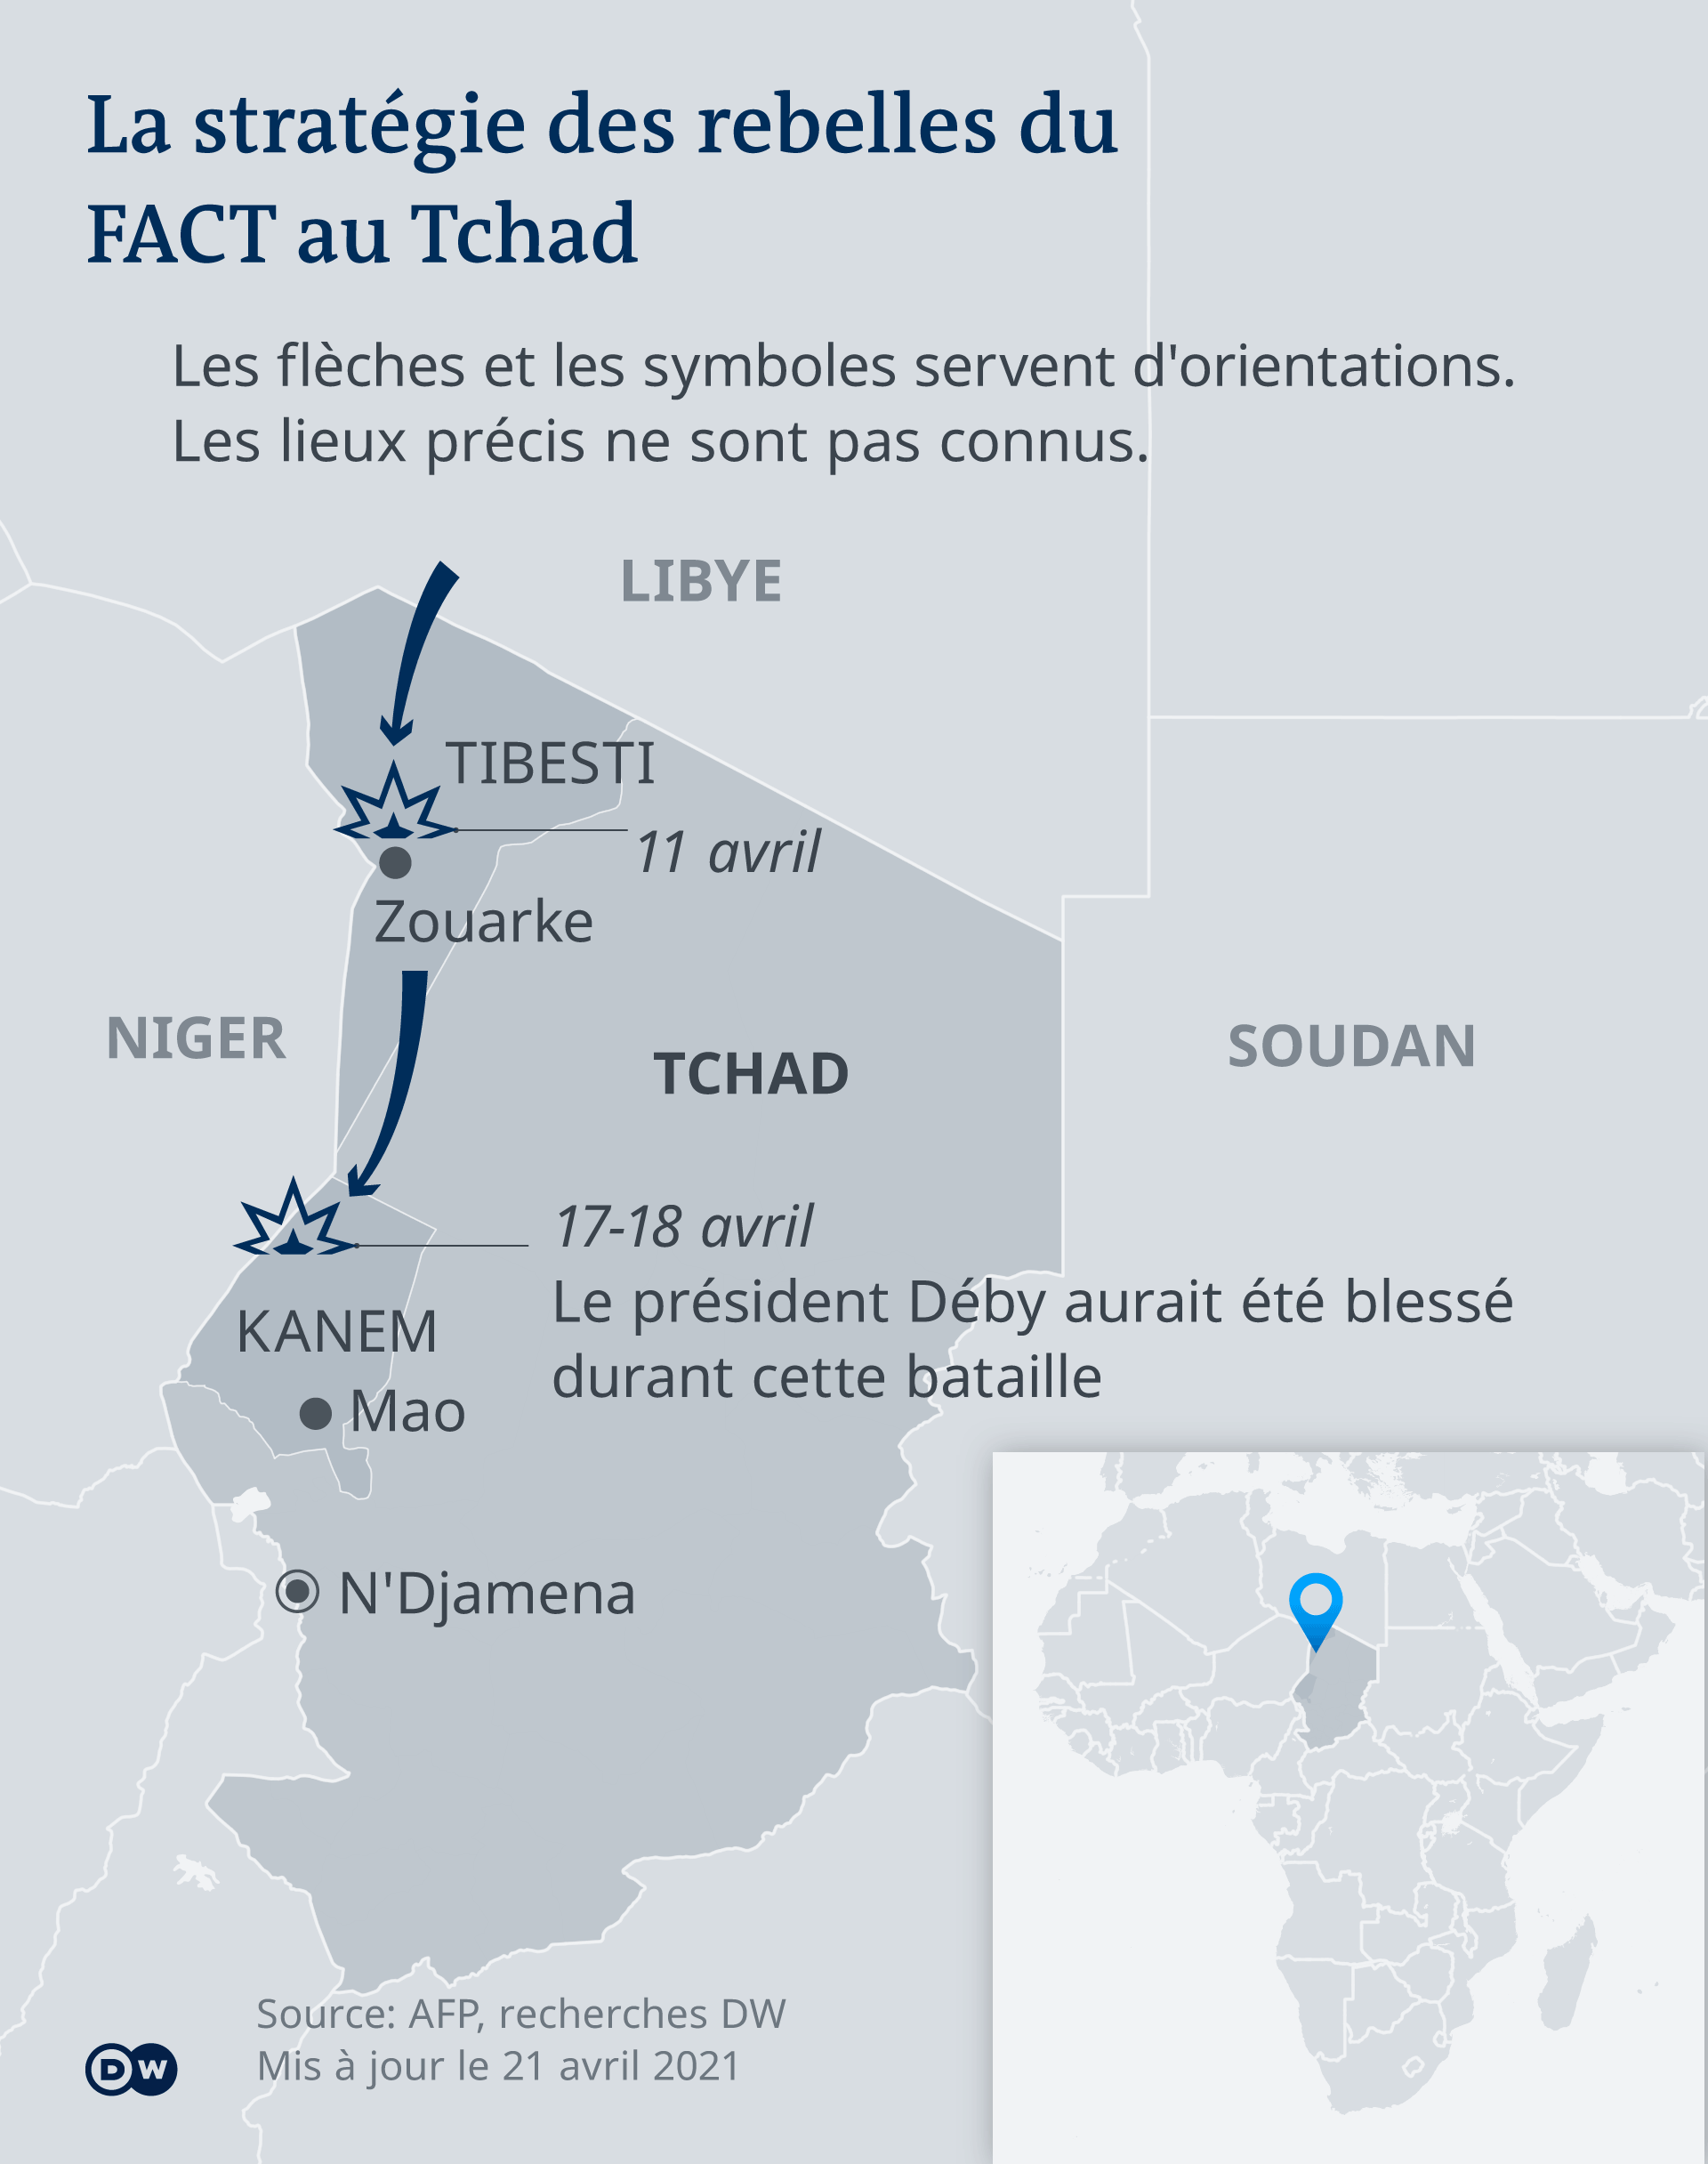 An inforgraphic showing the movement of the rebel group FACT in Chad leading up to President Deby's death